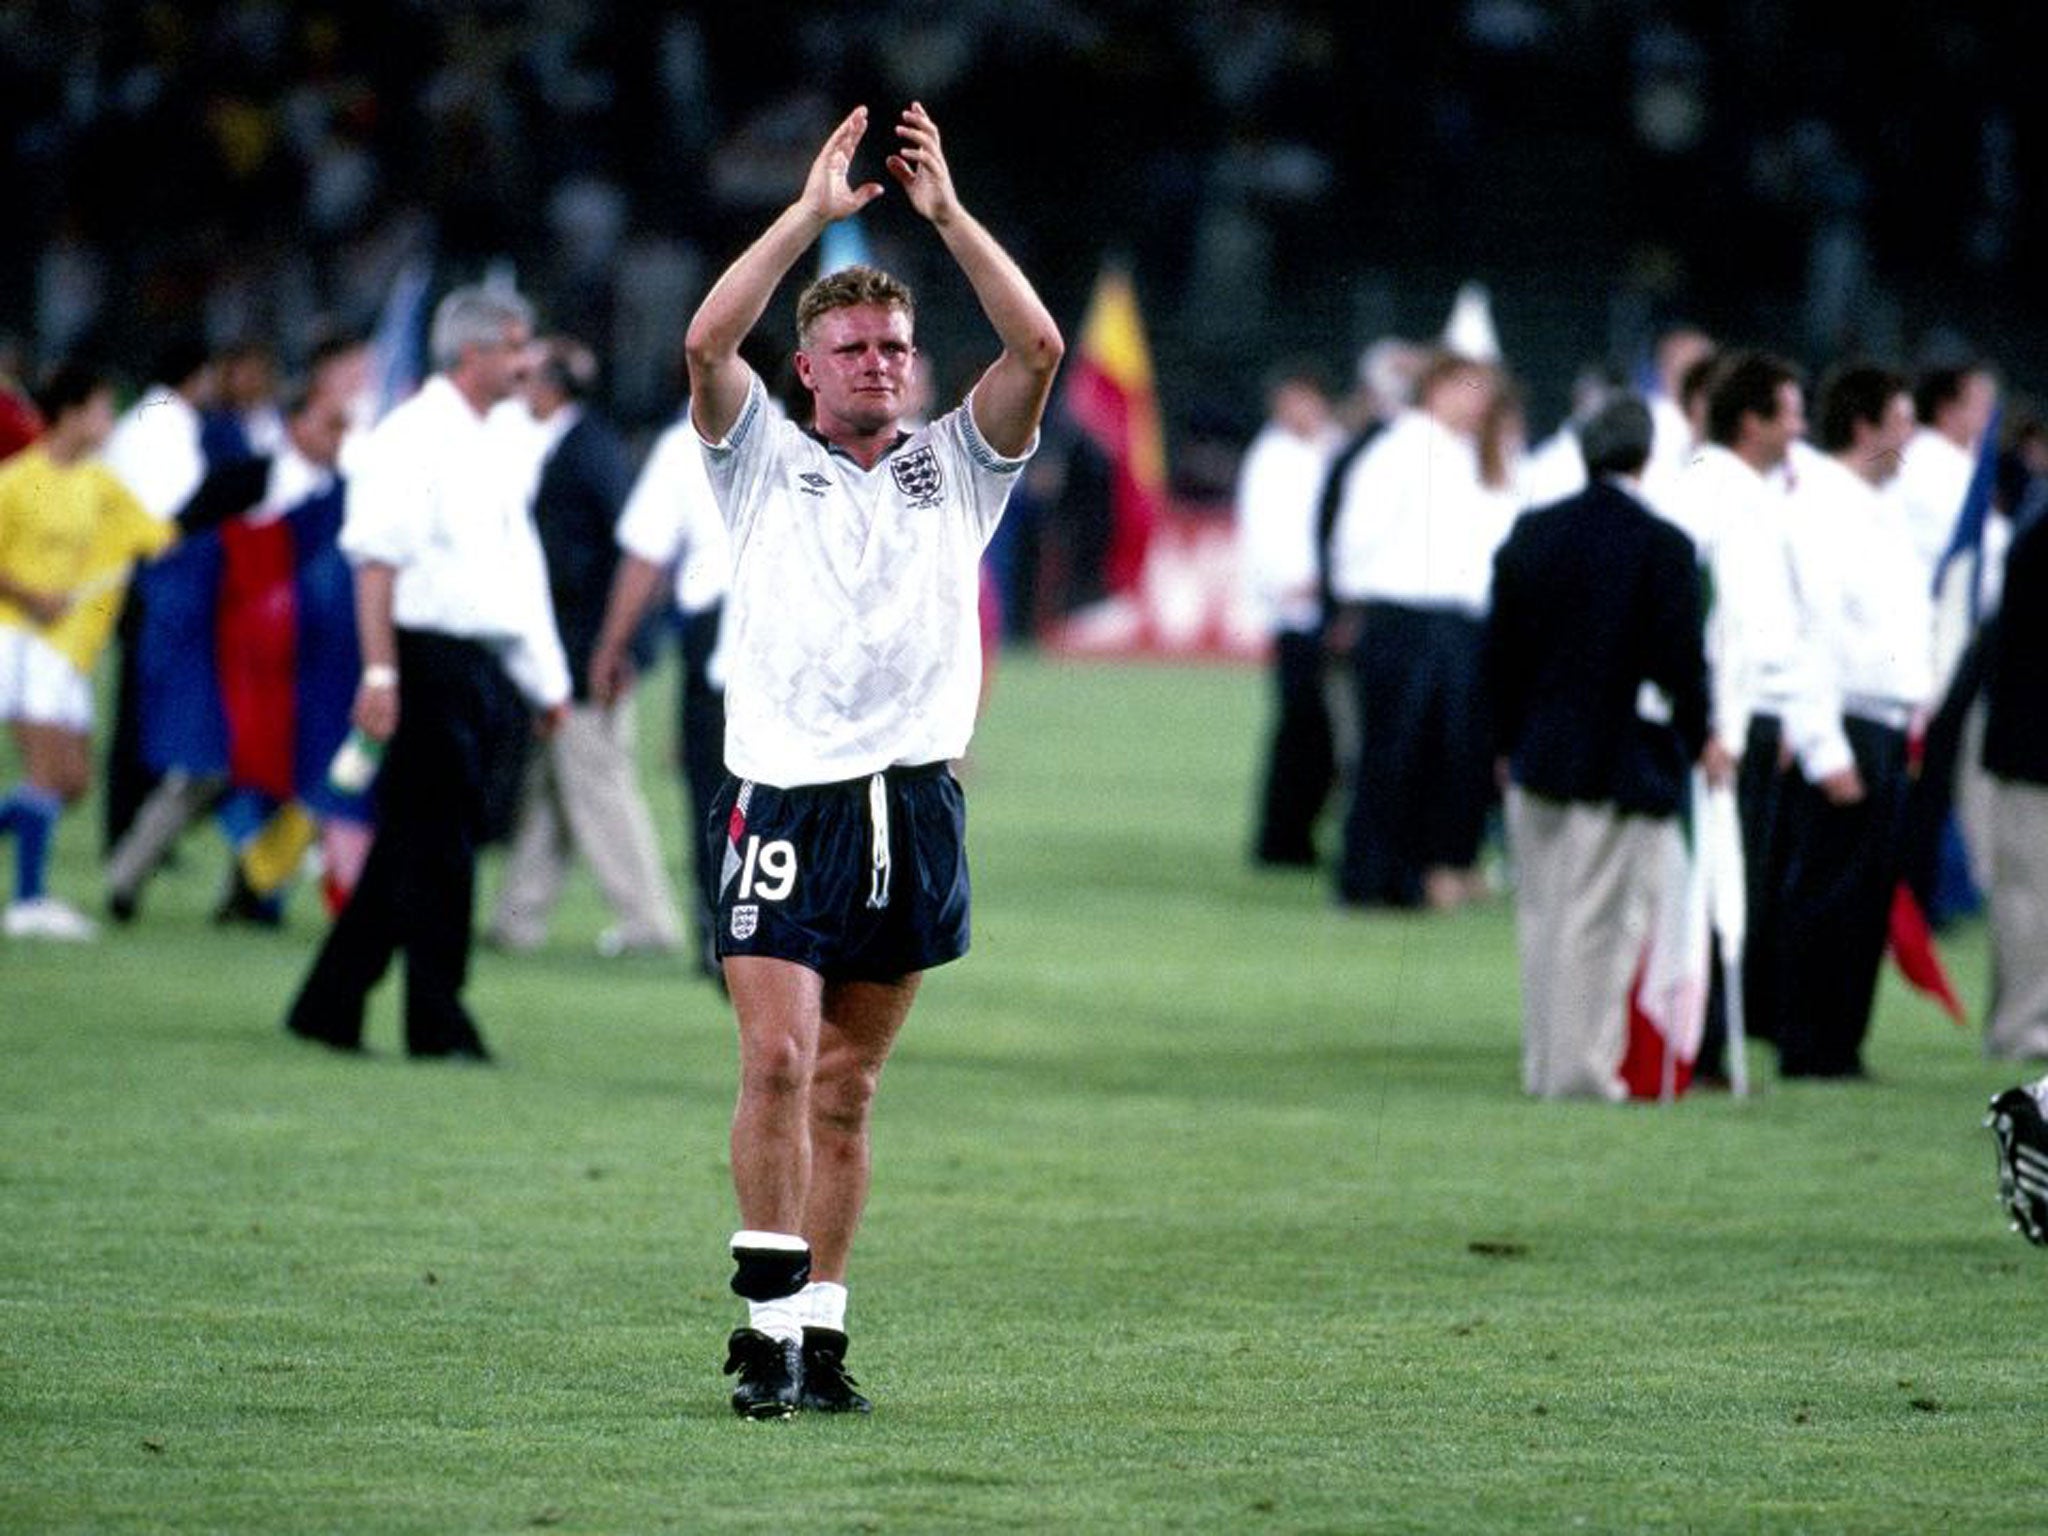 Losing it: Paul Gascoigne breaks into tears at the 1990 World Cup after England is defeated yet again